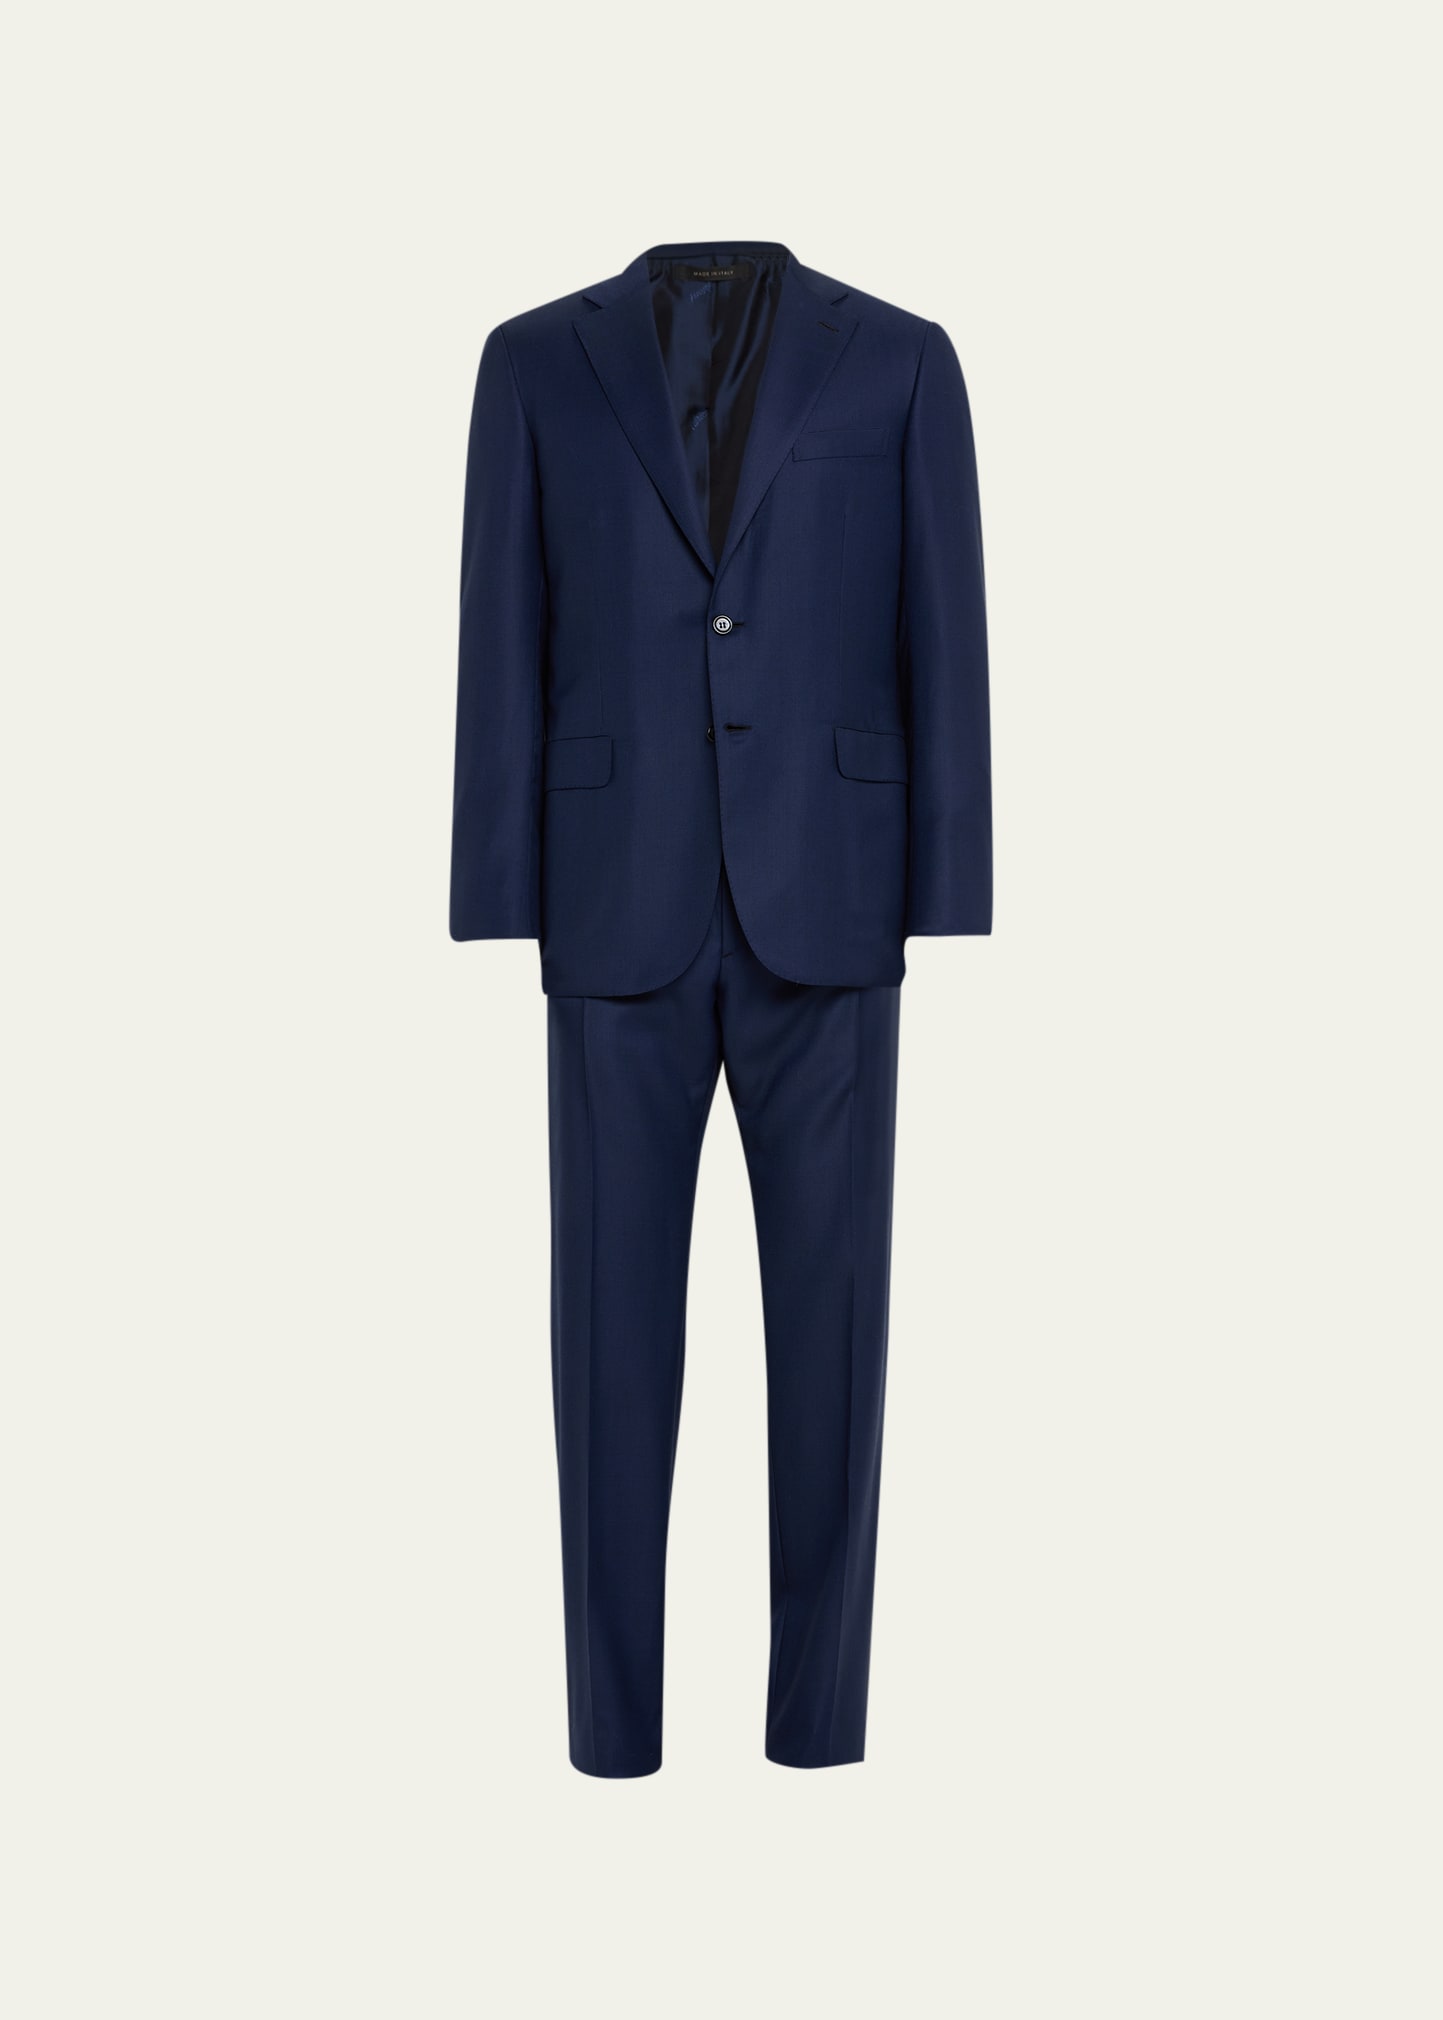 Men's Textured Solid Two-Piece Suit, Bright Navy